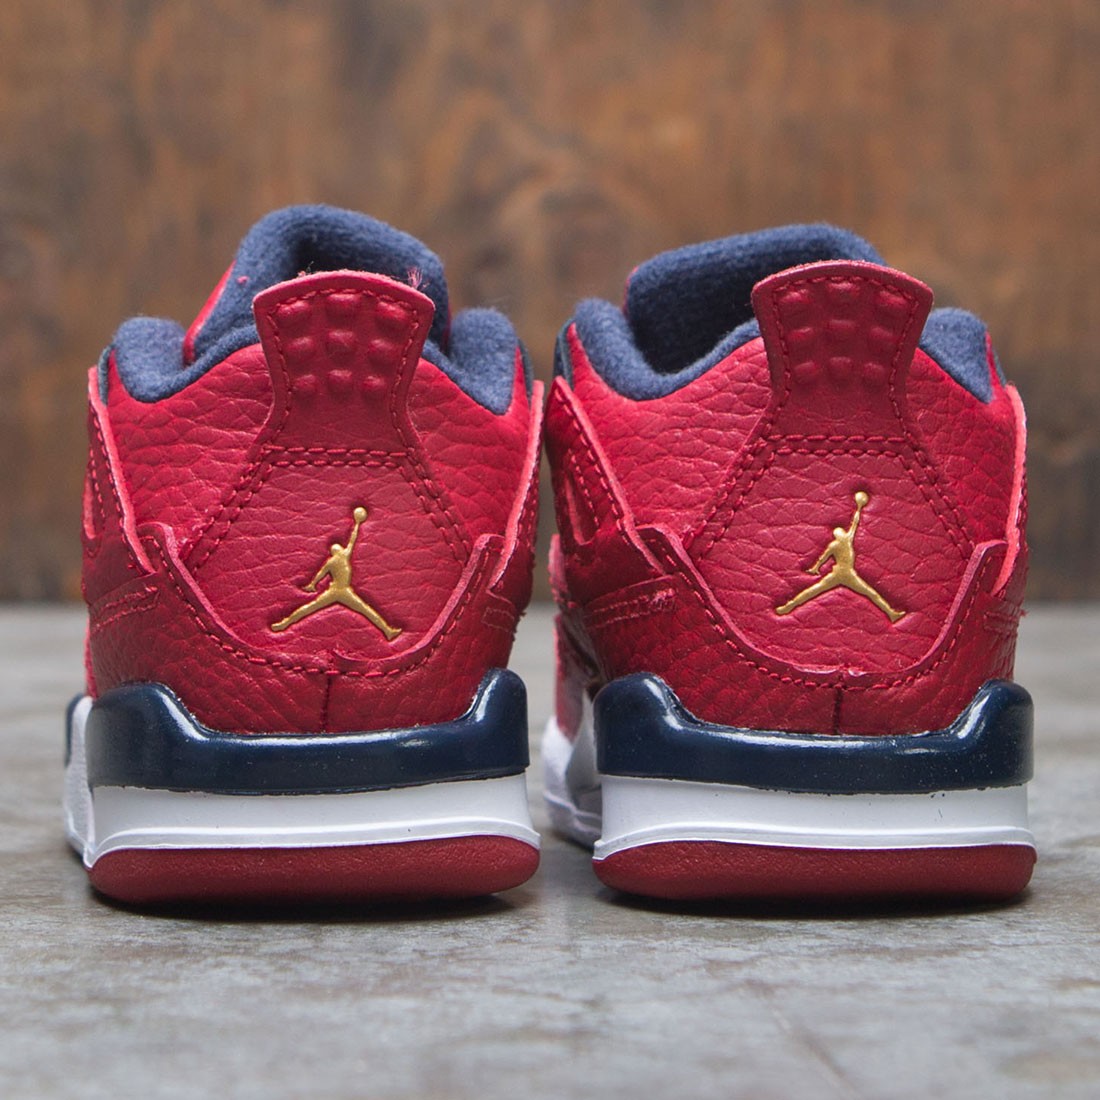 retro 4s red and blue